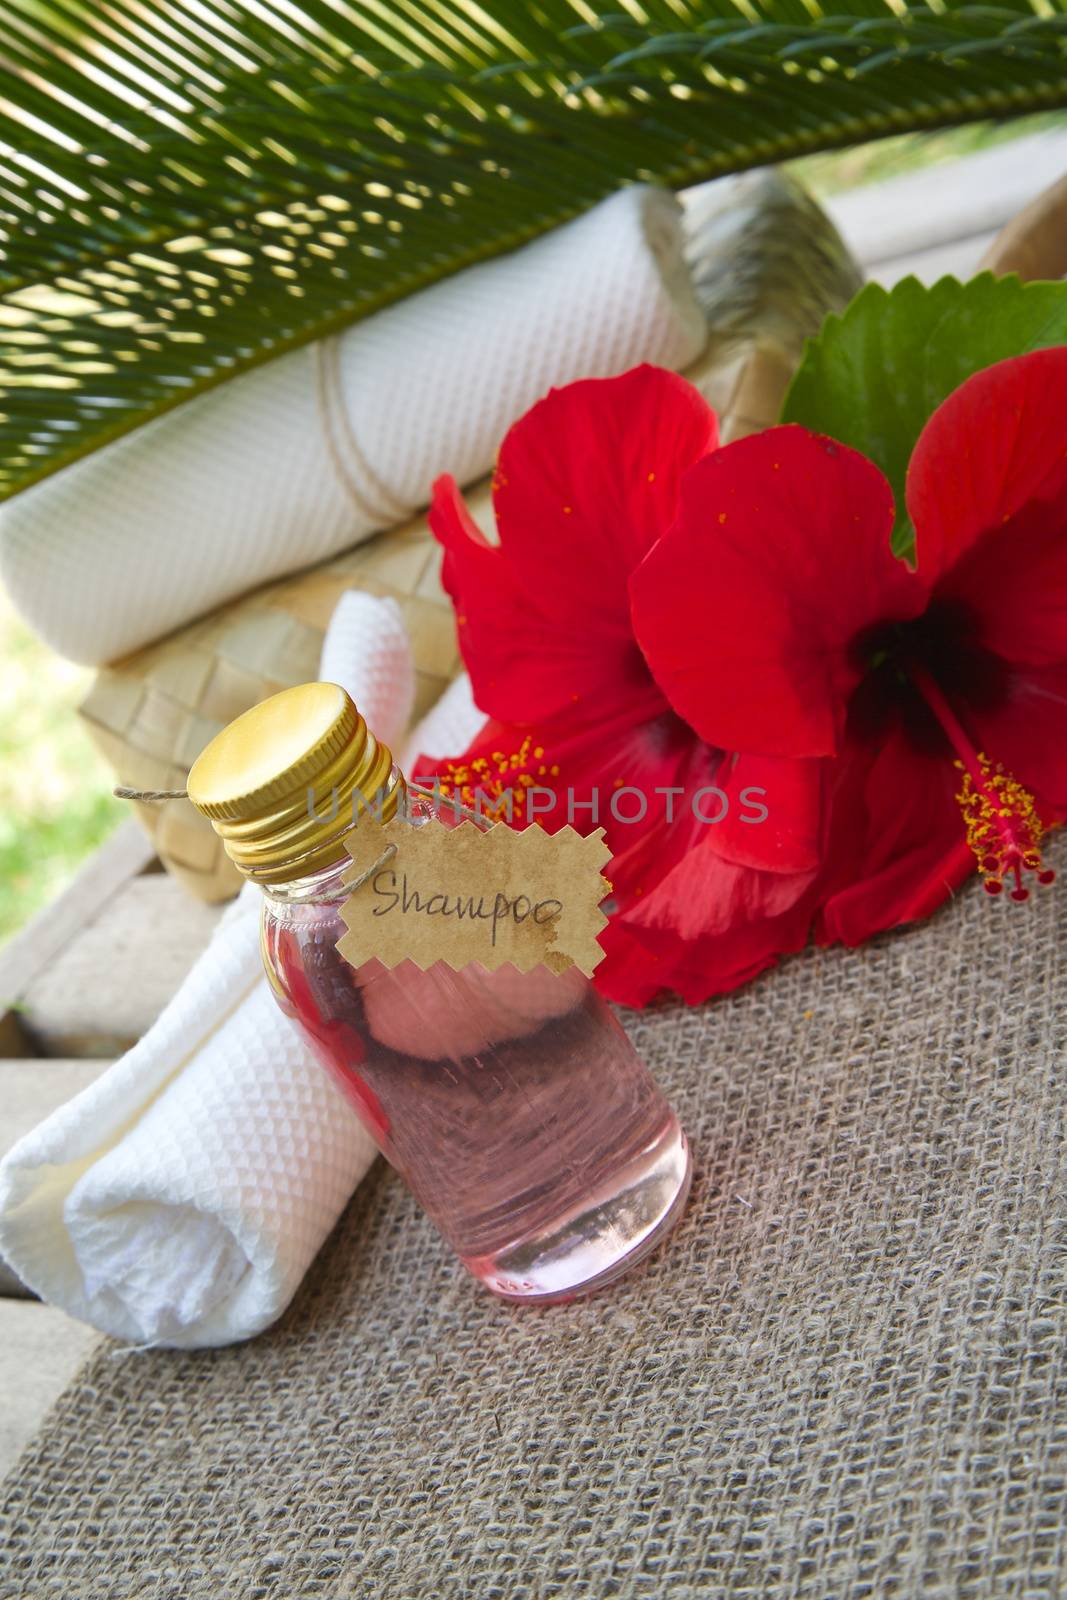 Hibiscus shampoo by tolikoff_photography